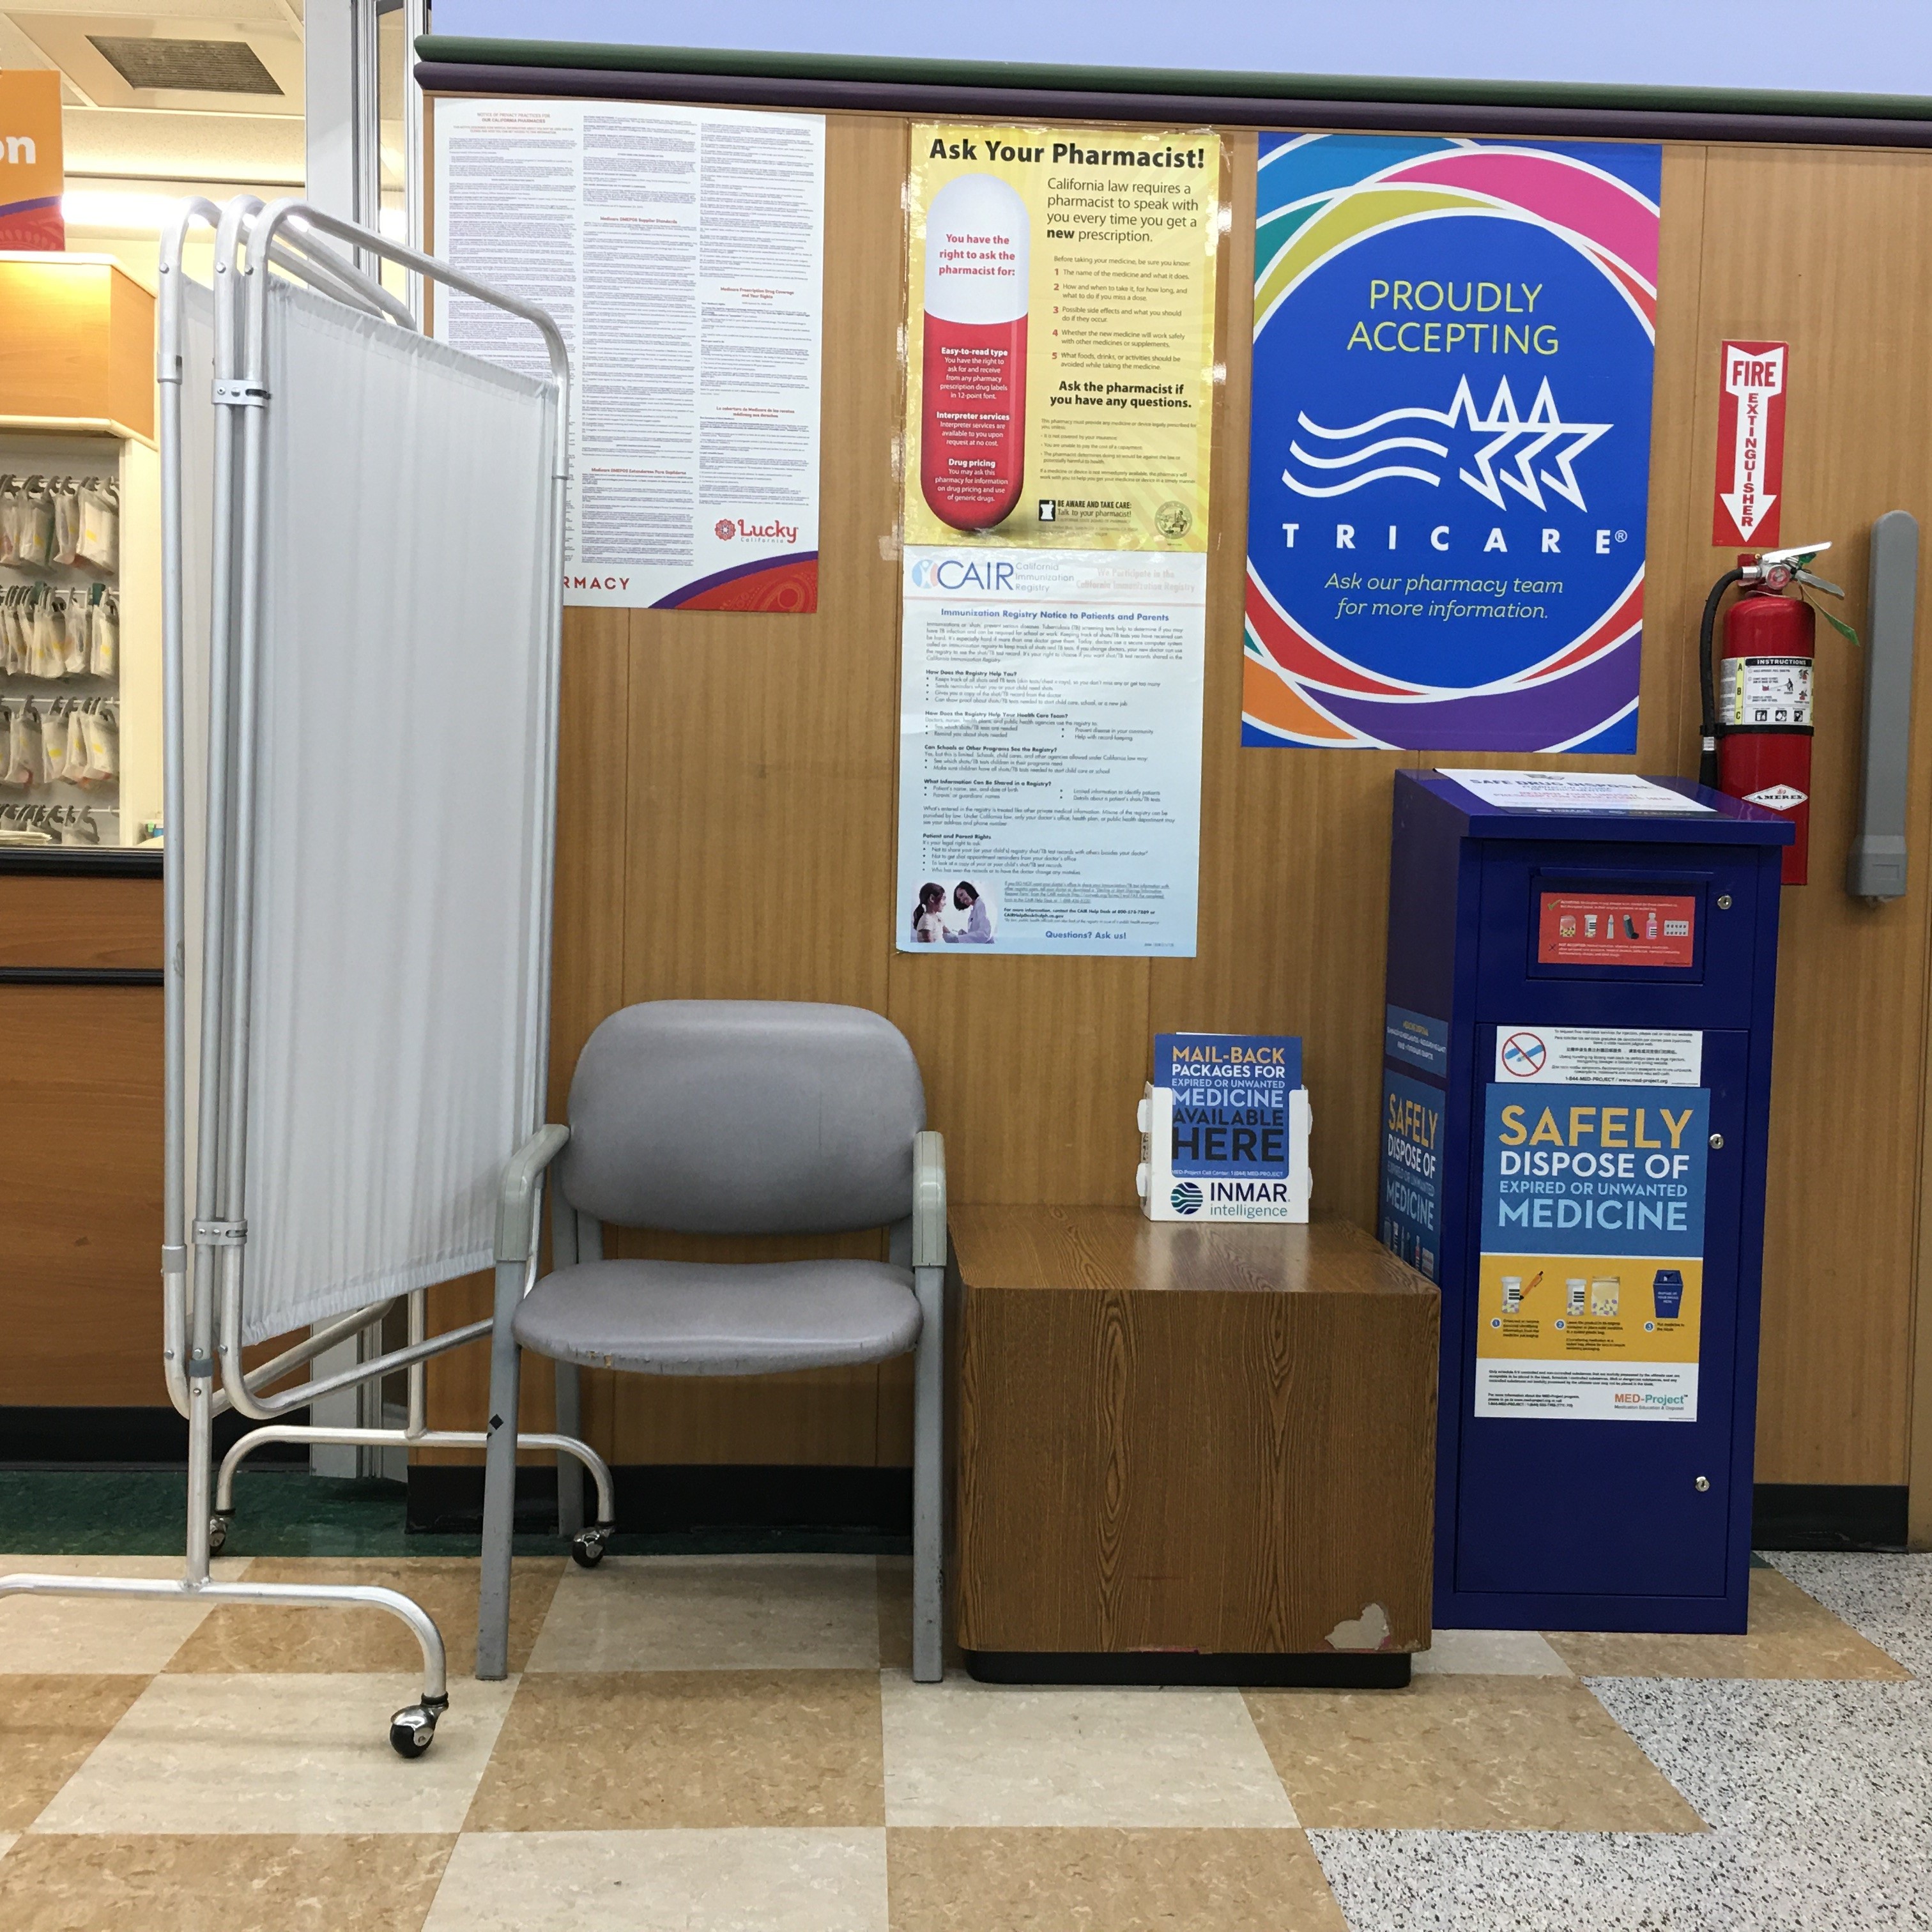 A sitting area of a pharmacy on Fulton street in San Francisco. There is a large blue kiosk for people to safely dispose of unused medicine.